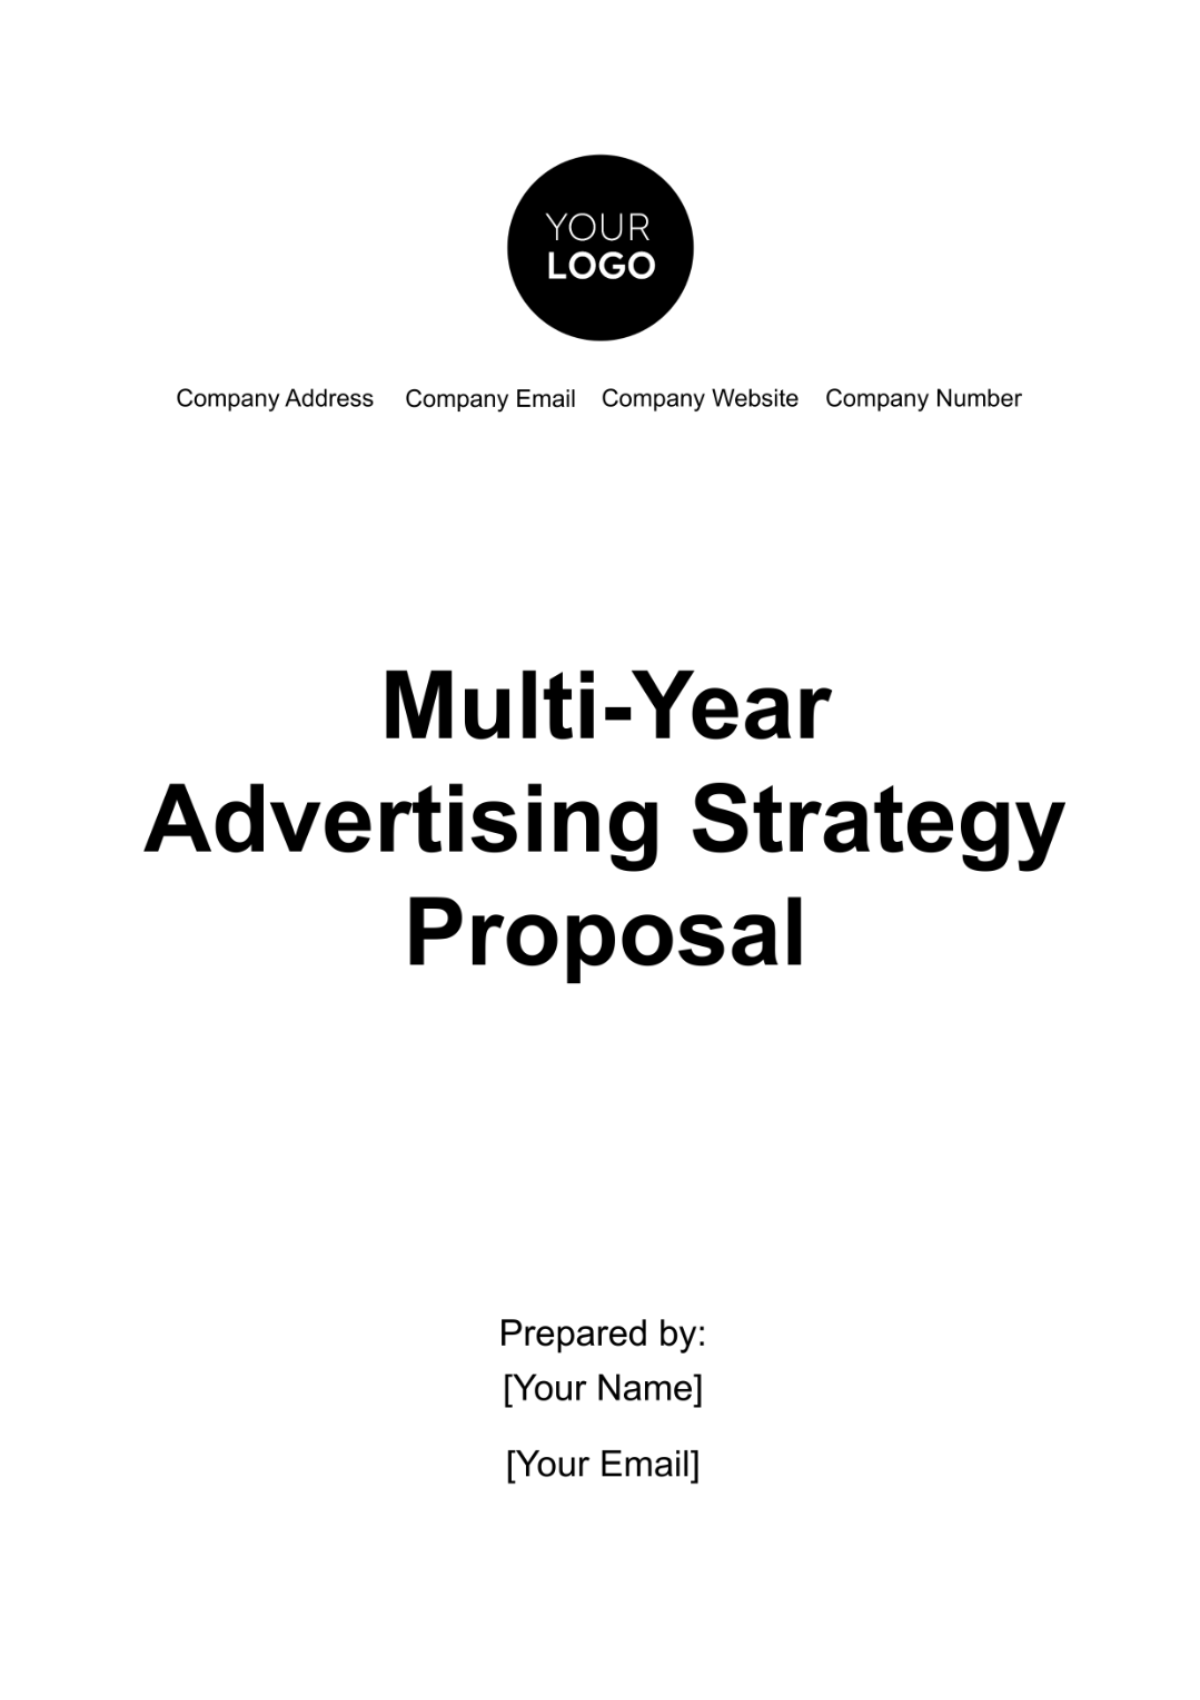 Free Multi-Year Advertising Strategy Proposal Template